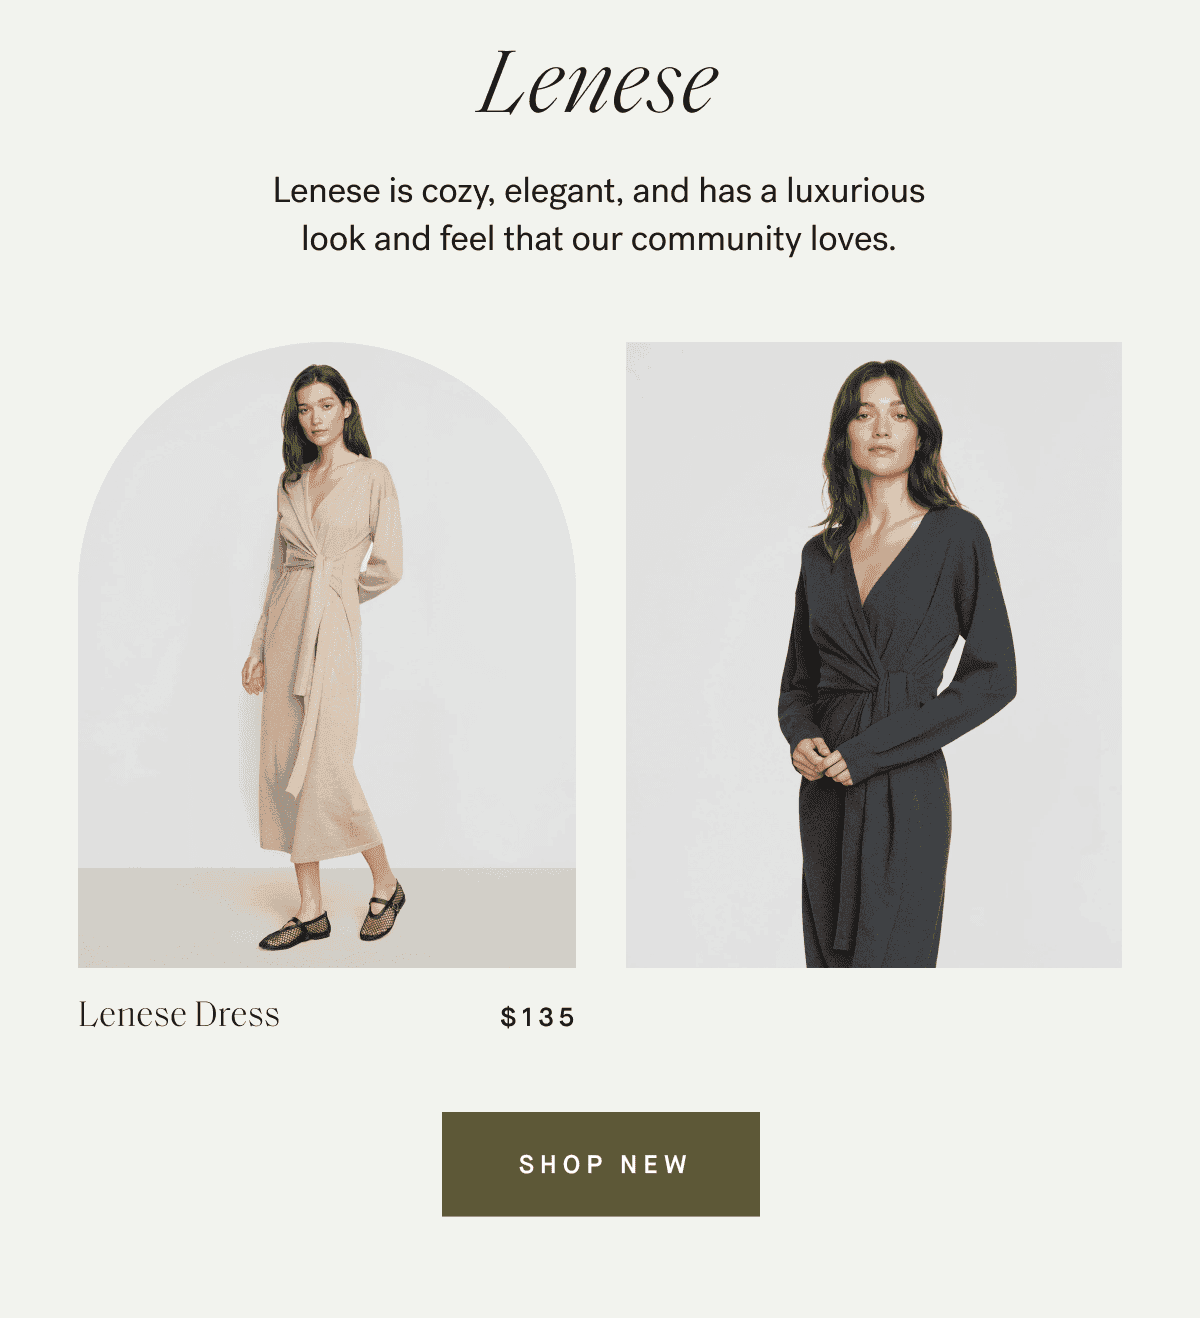 Lenese —\xa0Lenese is cozy, elegant, and has a luxurious look and feel that our community loves.